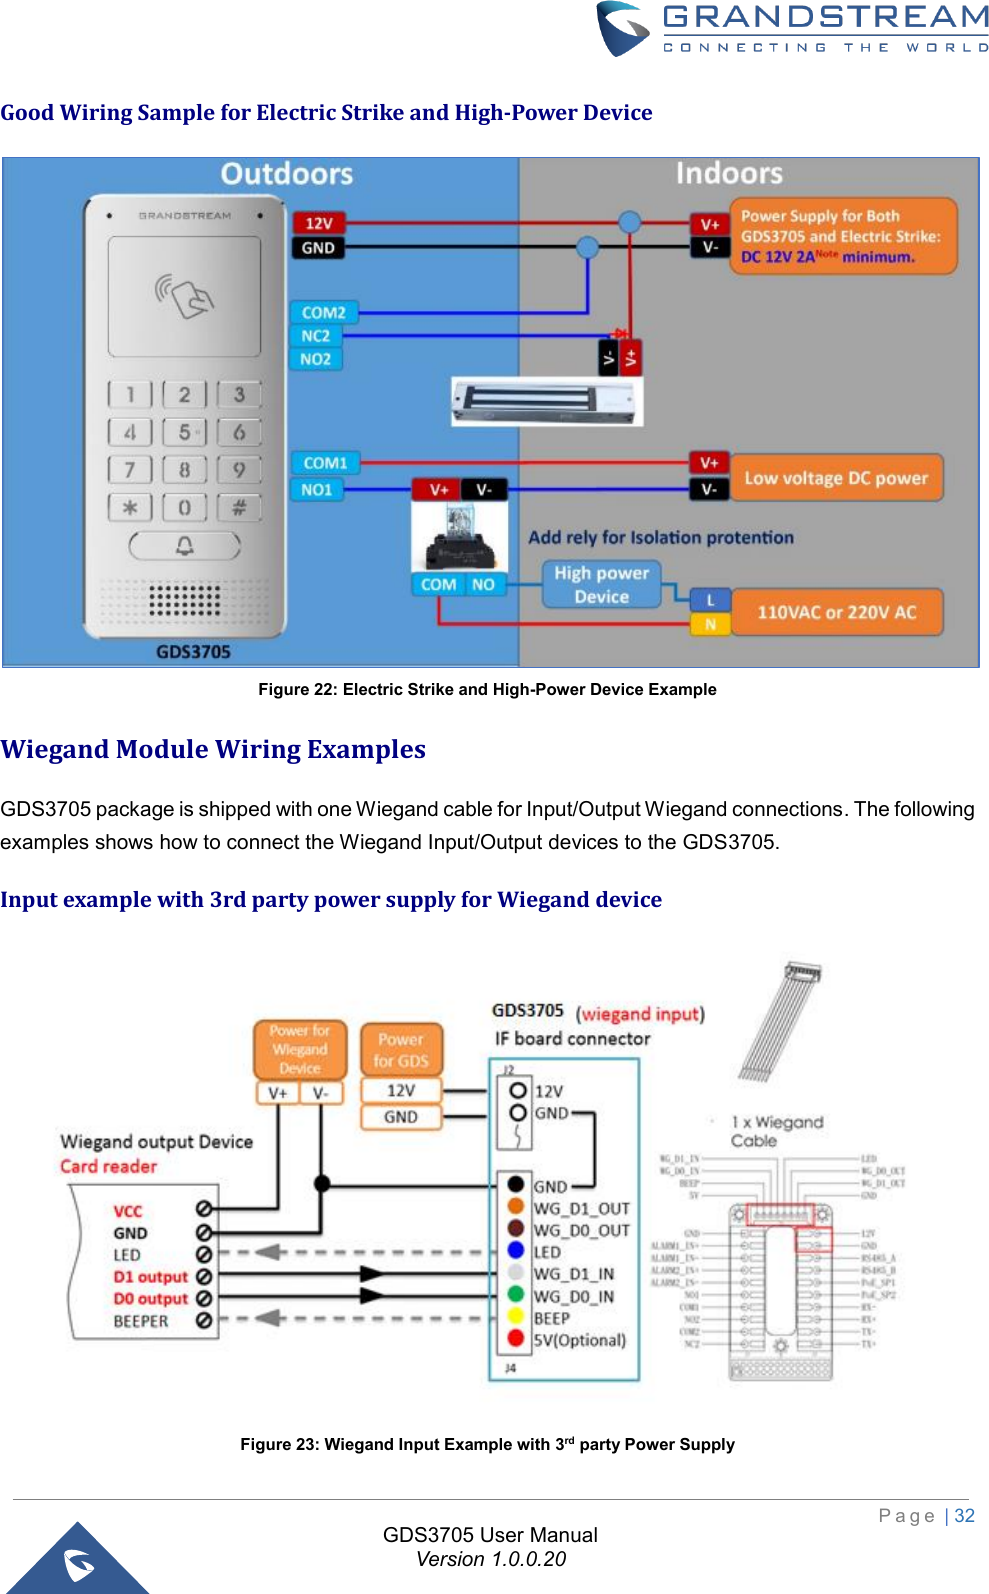                                                                         P a g e  | 32  GDS3705 User Manual Version 1.0.0.20 Good Wiring Sample for Electric Strike and High-Power Device  Figure 22: Electric Strike and High-Power Device Example Wiegand Module Wiring Examples GDS3705 package is shipped with one Wiegand cable for Input/Output Wiegand connections. The following examples shows how to connect the Wiegand Input/Output devices to the GDS3705.  Input example with 3rd party power supply for Wiegand device  Figure 23: Wiegand Input Example with 3rd party Power Supply 